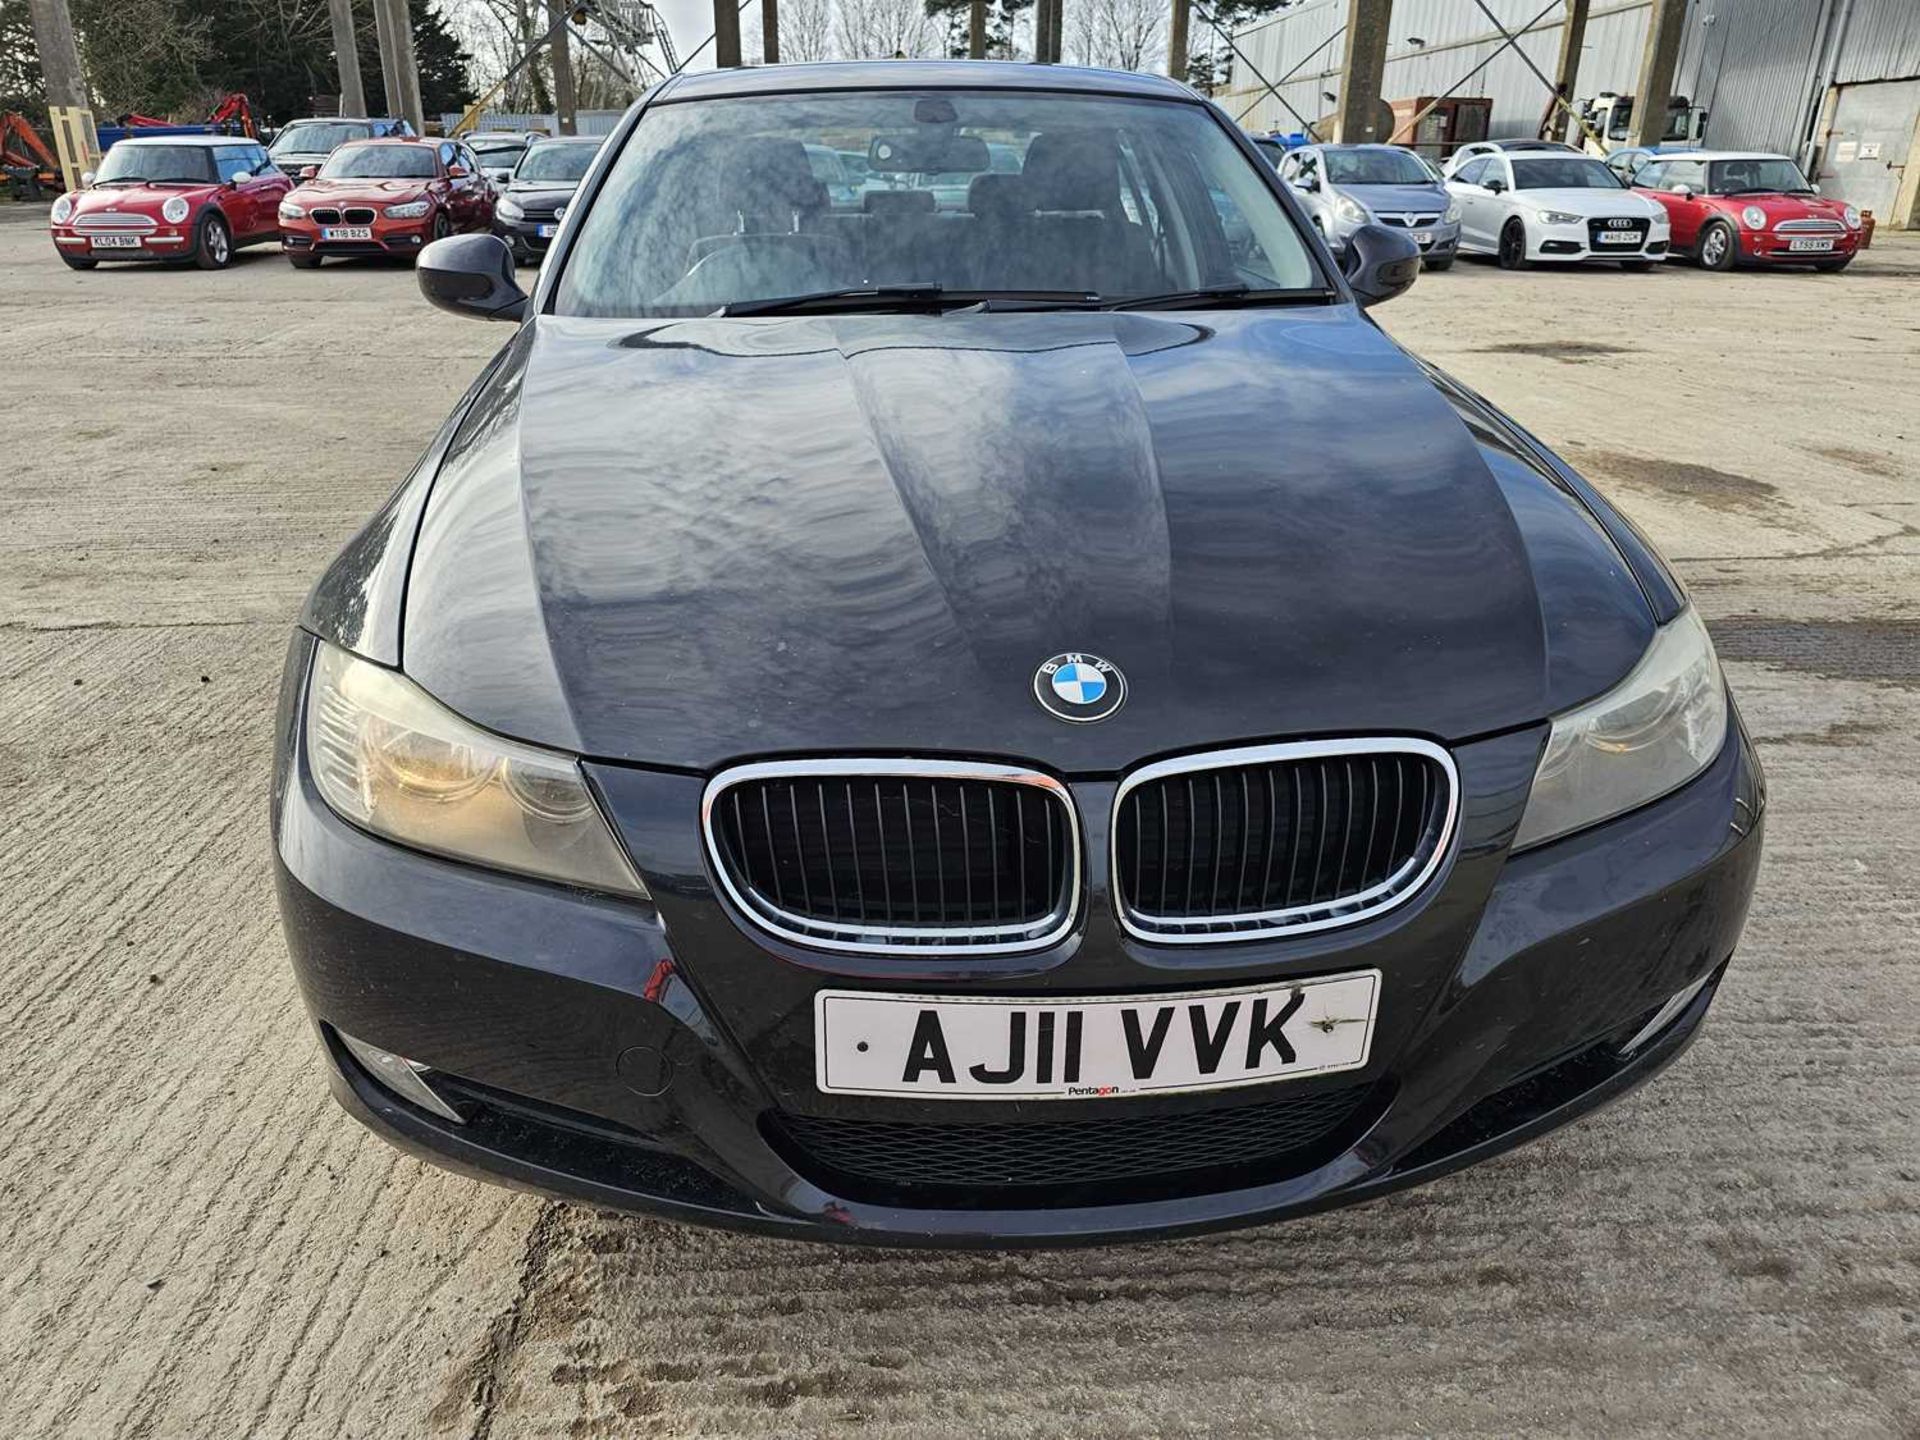 2011 BMW 320D, 6 Speed, Parking Sensors, Bluetooth, A/C (NO VAT)(Reg. Docs. Available, Tested 01/25) - Image 8 of 28